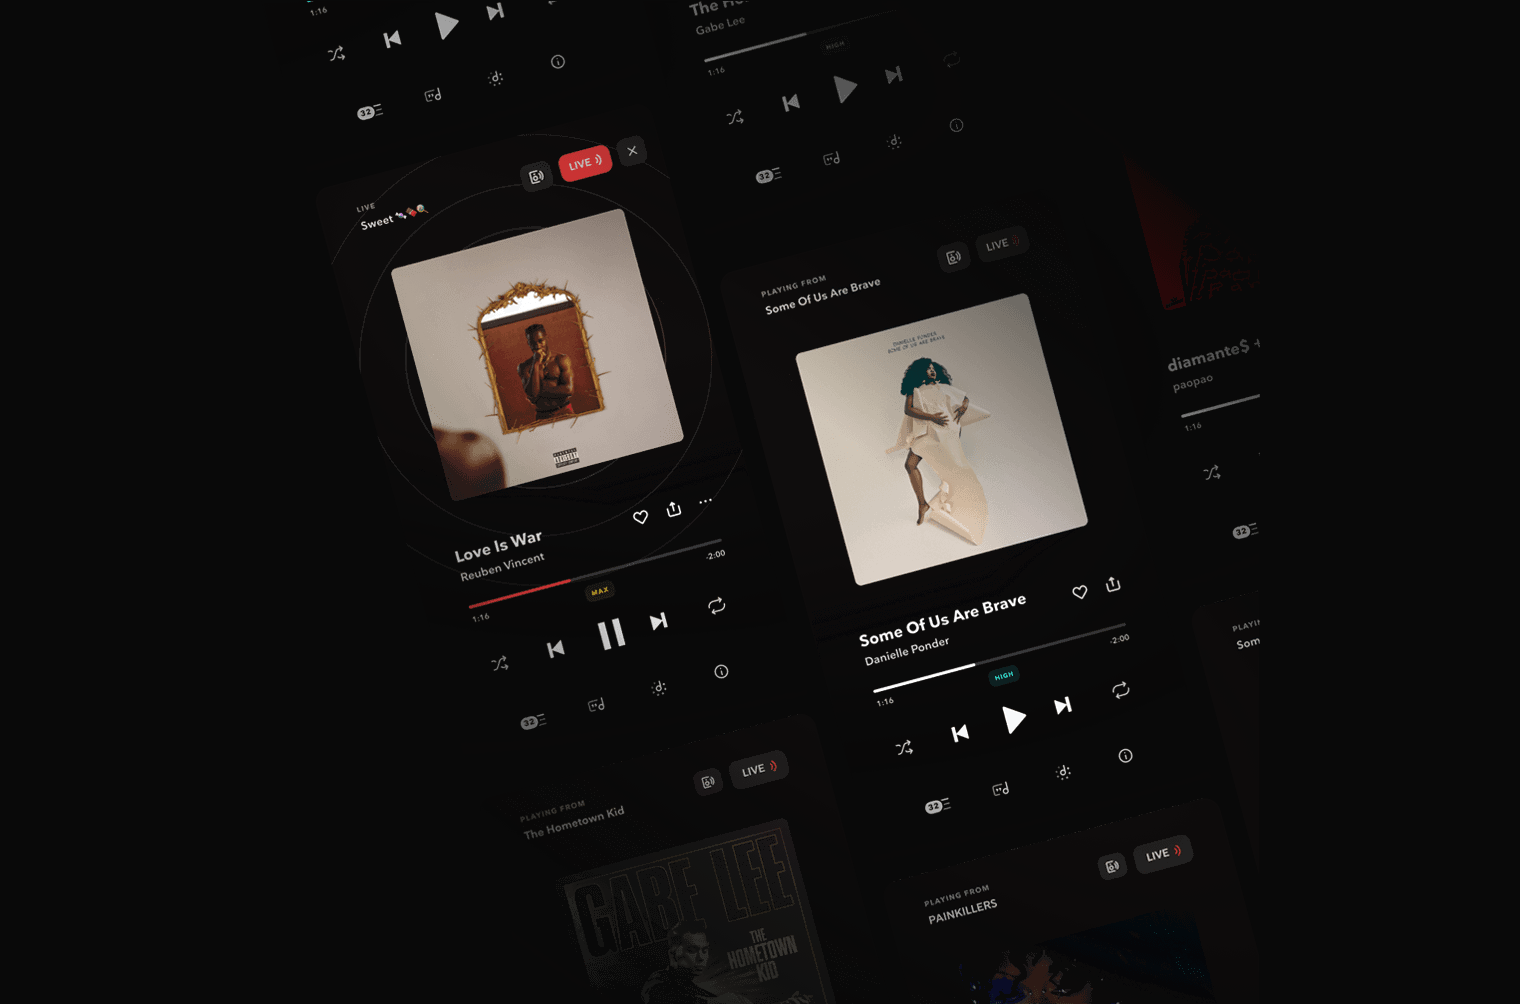 Two screenshots of the TIDAL mobile interface